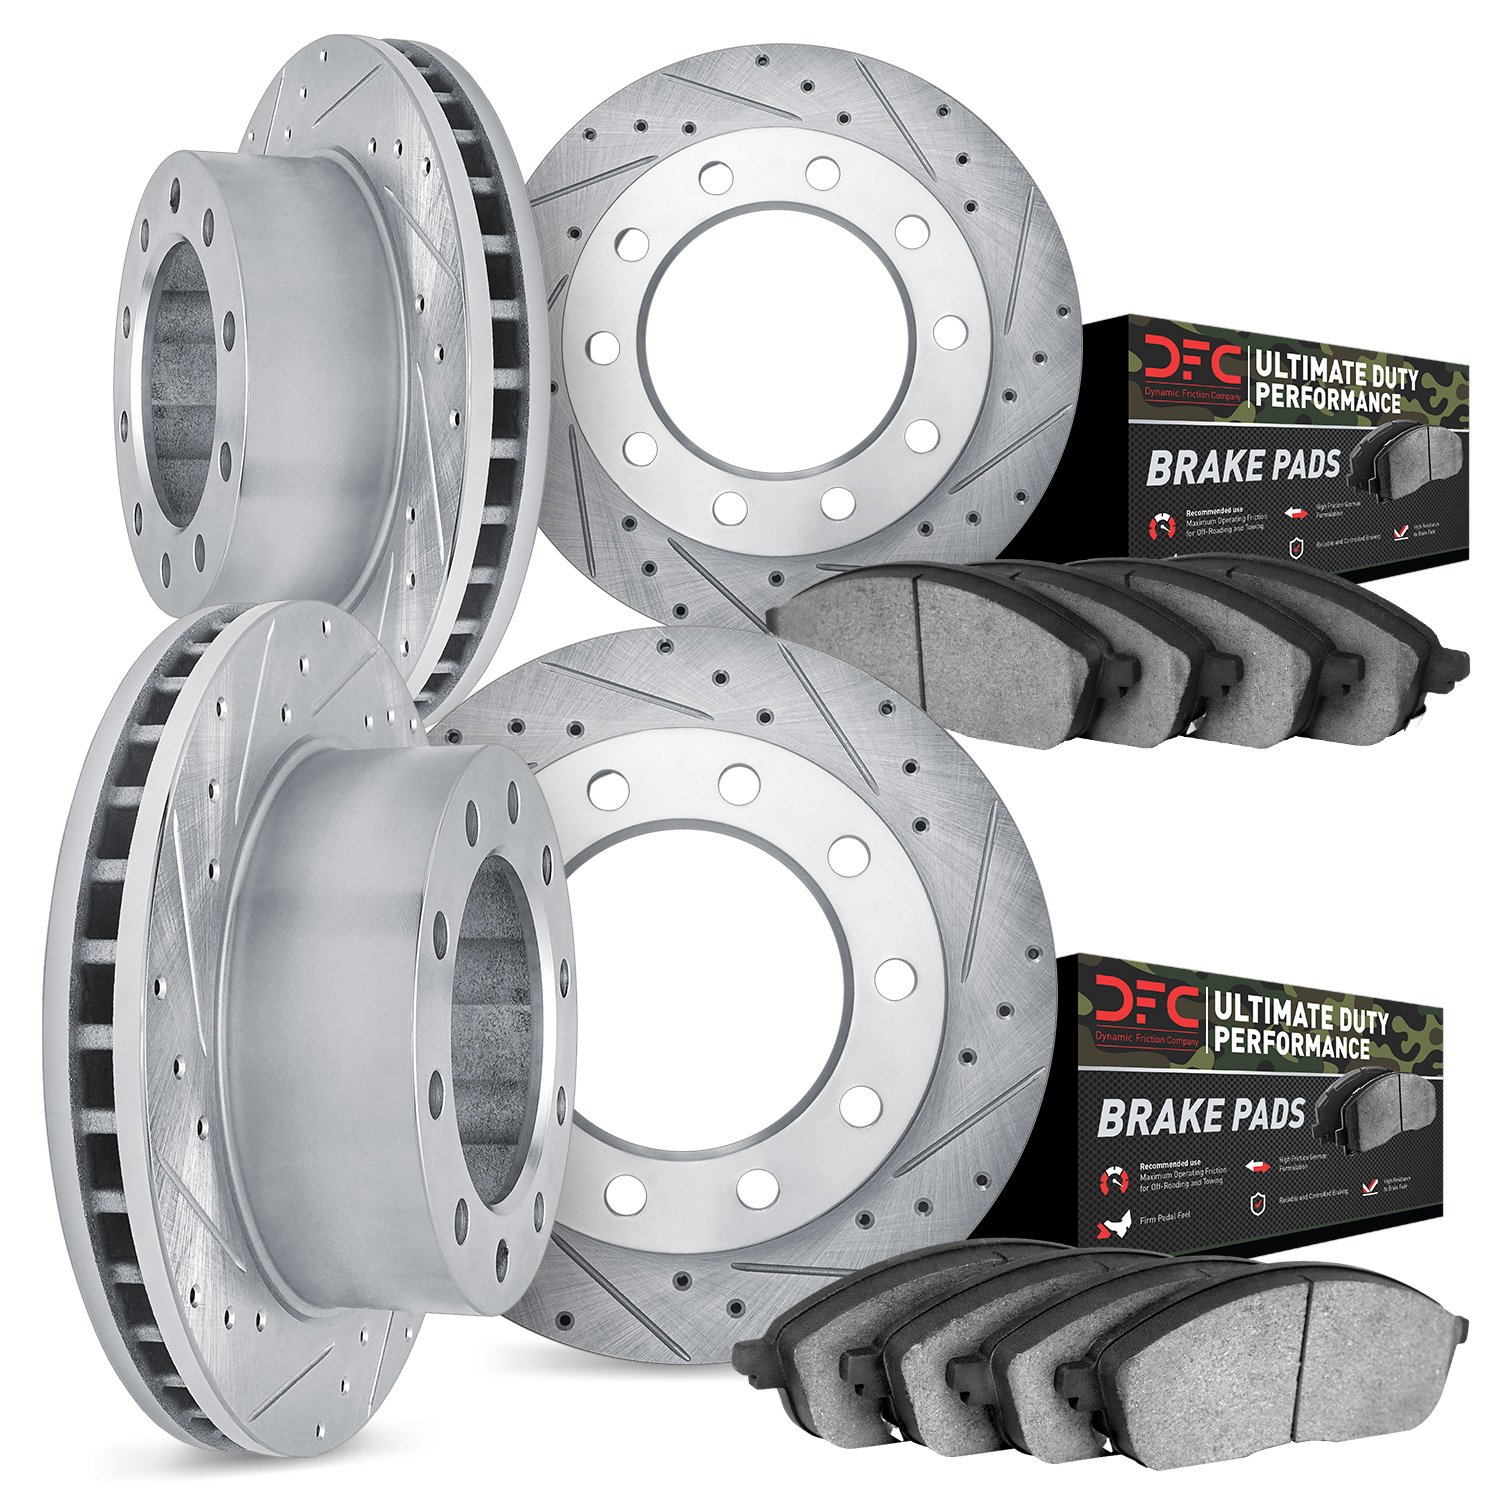 7404-54012 Drilled/Slotted Brake Rotors with Ultimate-Duty Brake Pads Kit [Silver], 1999-2001 Ford/Lincoln/Mercury/Mazda, Positi